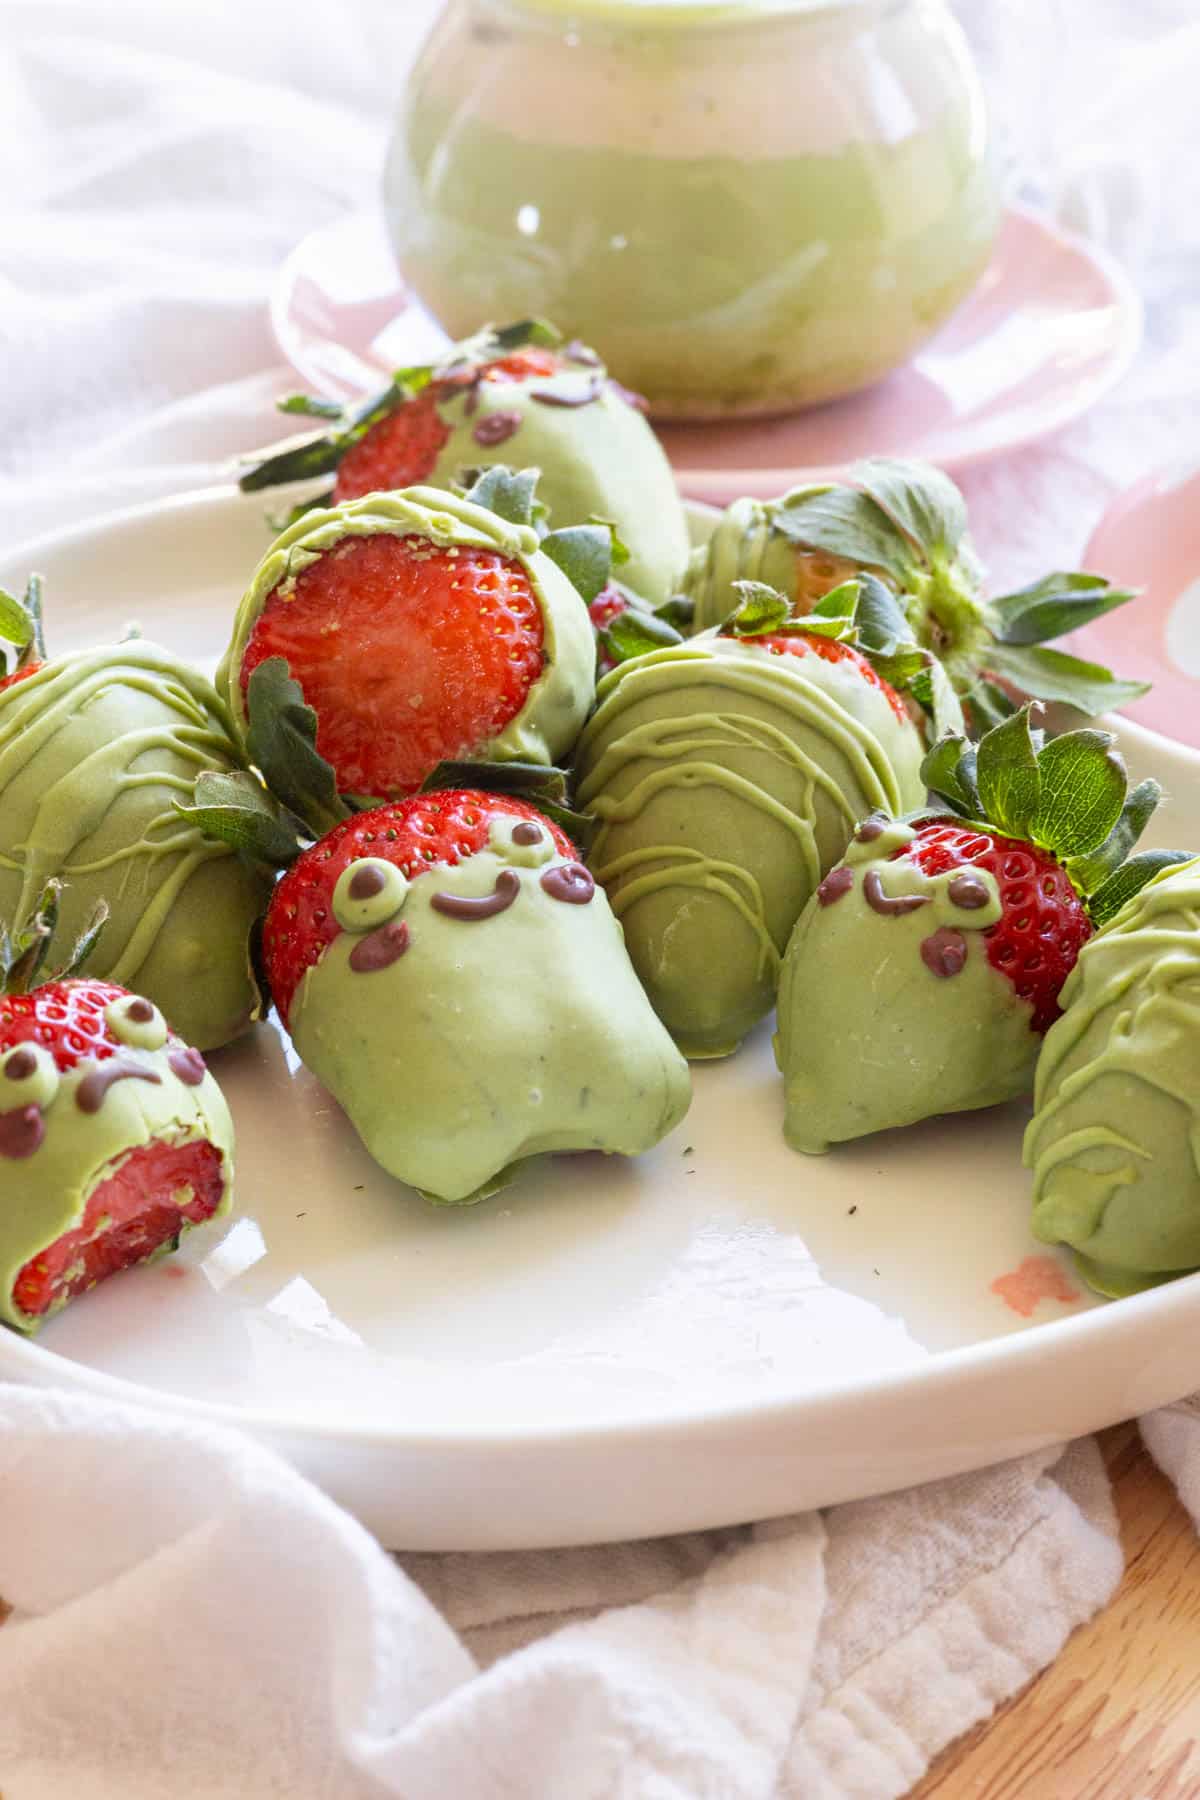 Cute matcha covered strawberries decorated as frogs.